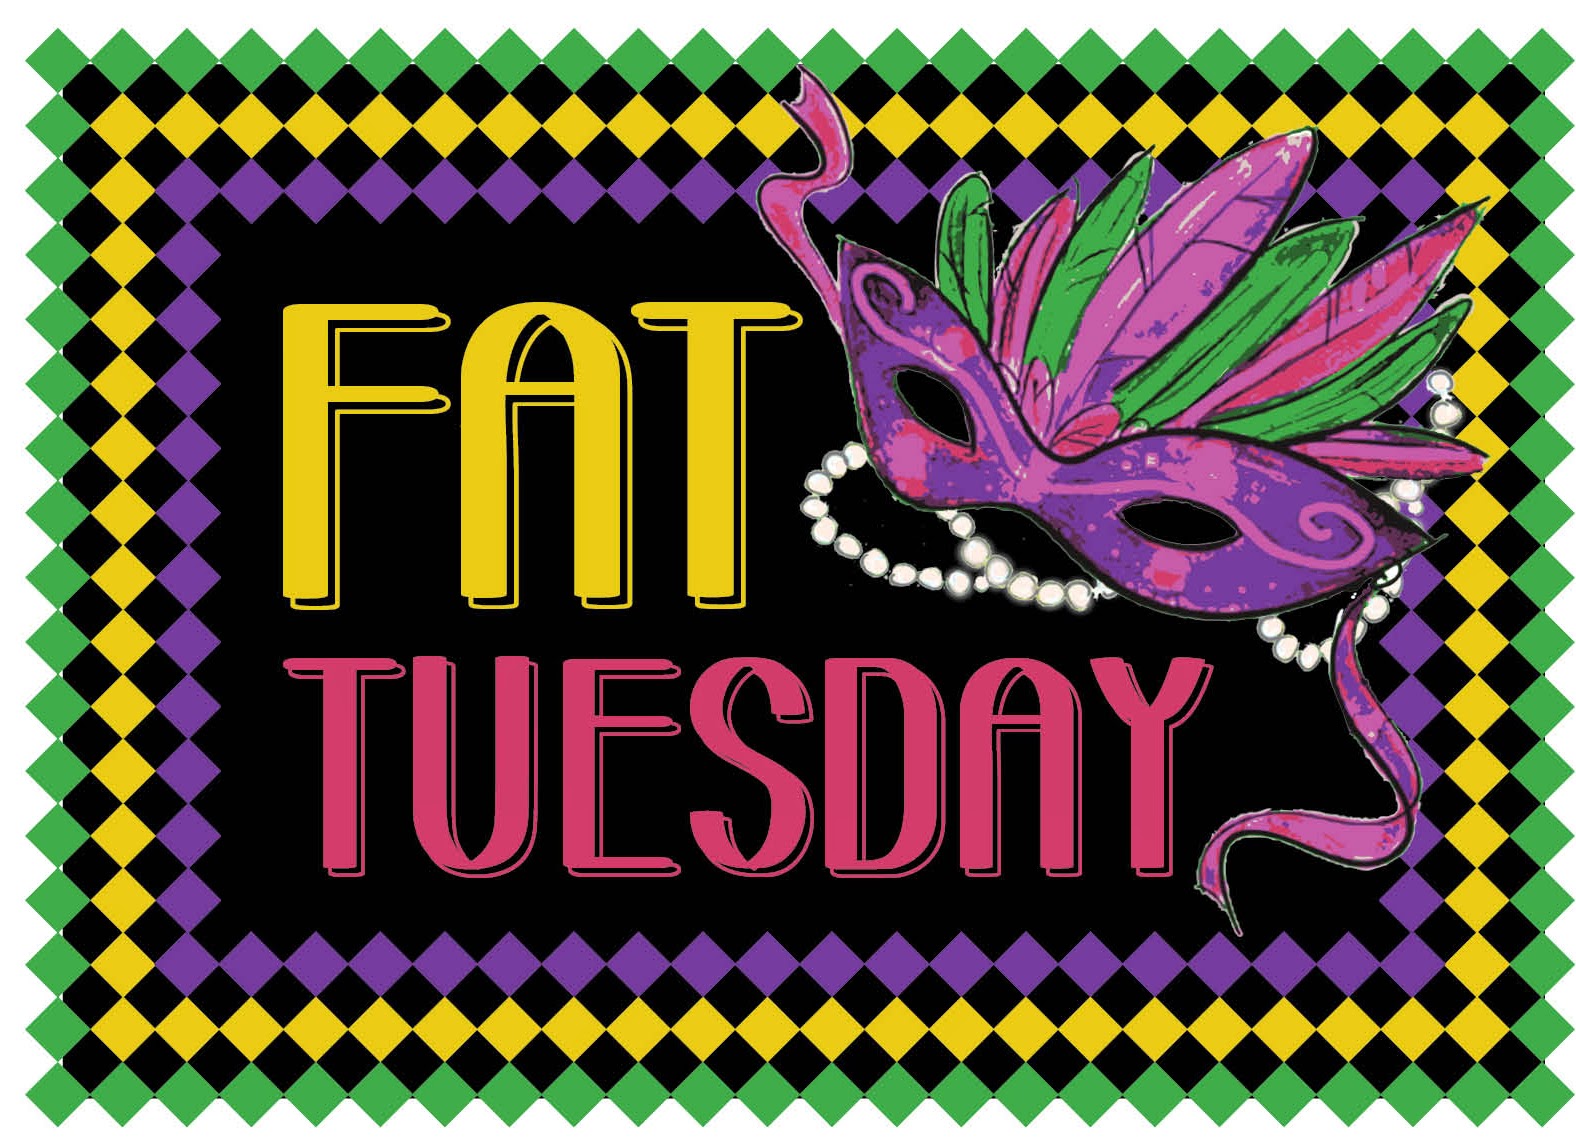 My Real Life Fitness Pal Fat Tuesday & New Tires Wednesday